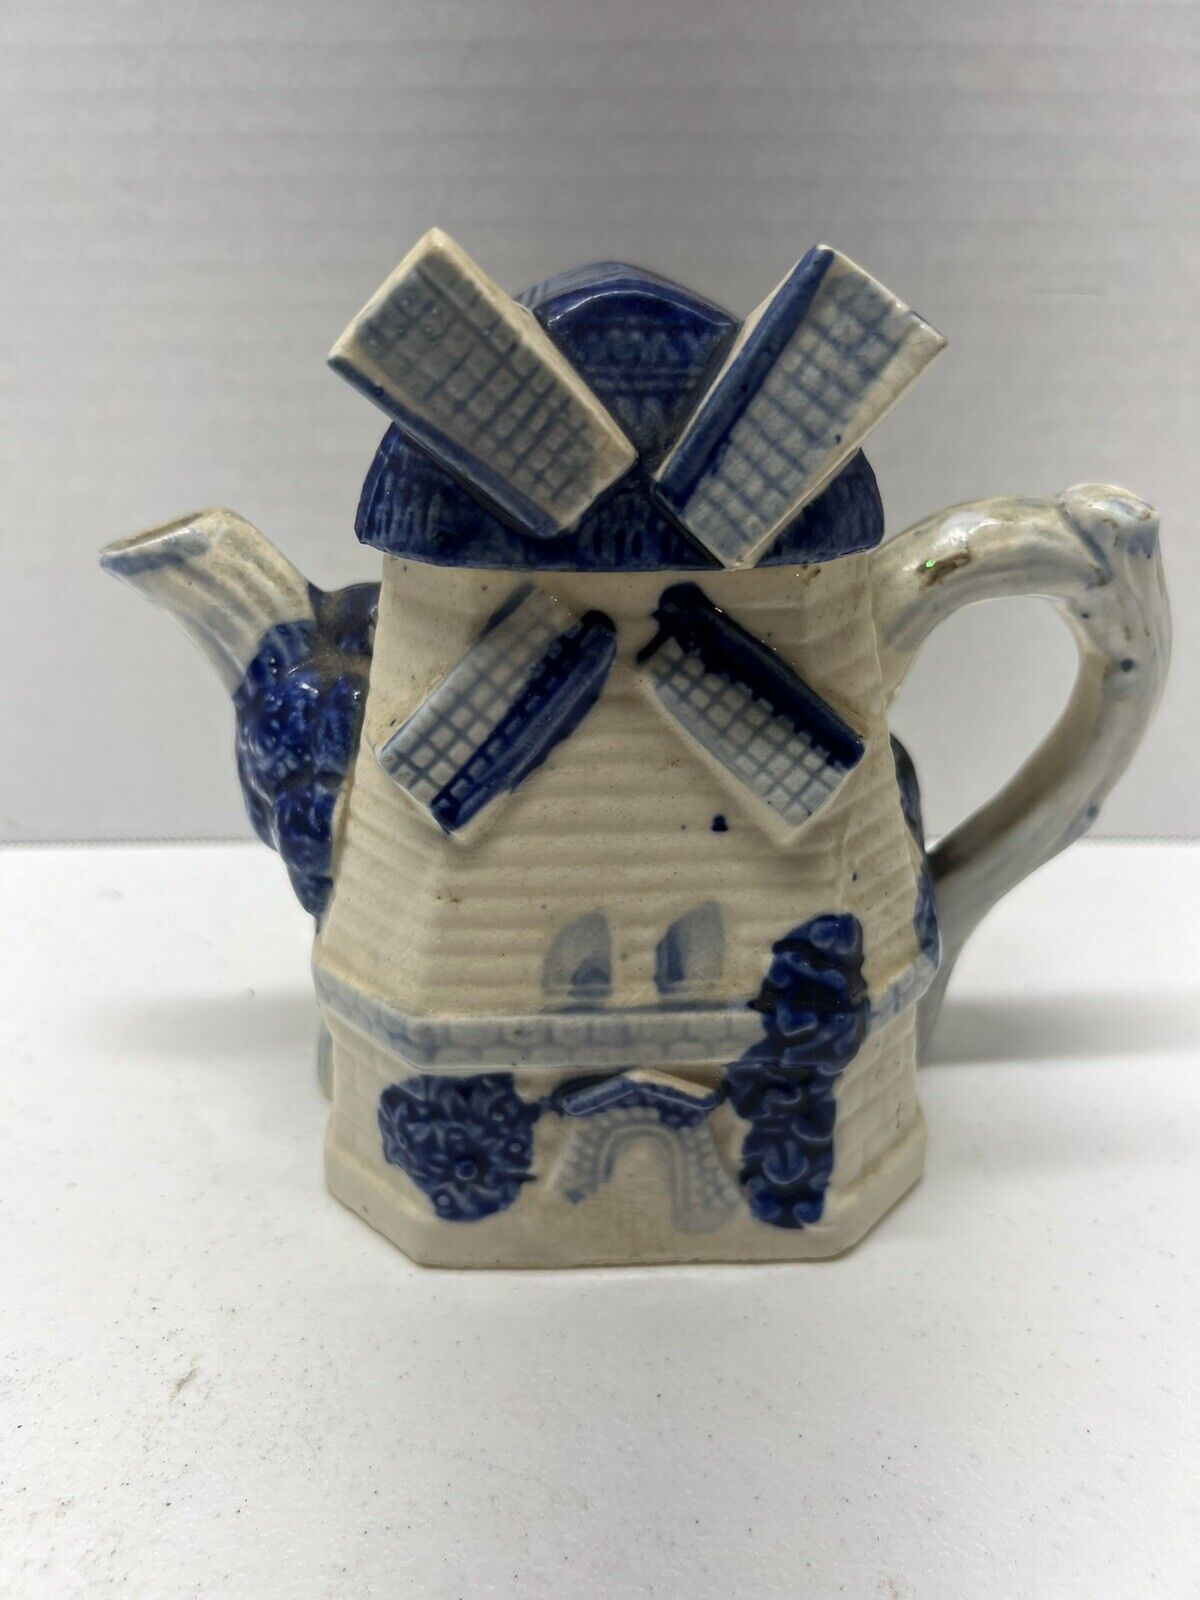 Vintage Blue & White Ceramic Dutch Windmill Teapot 1950s Made In Japan